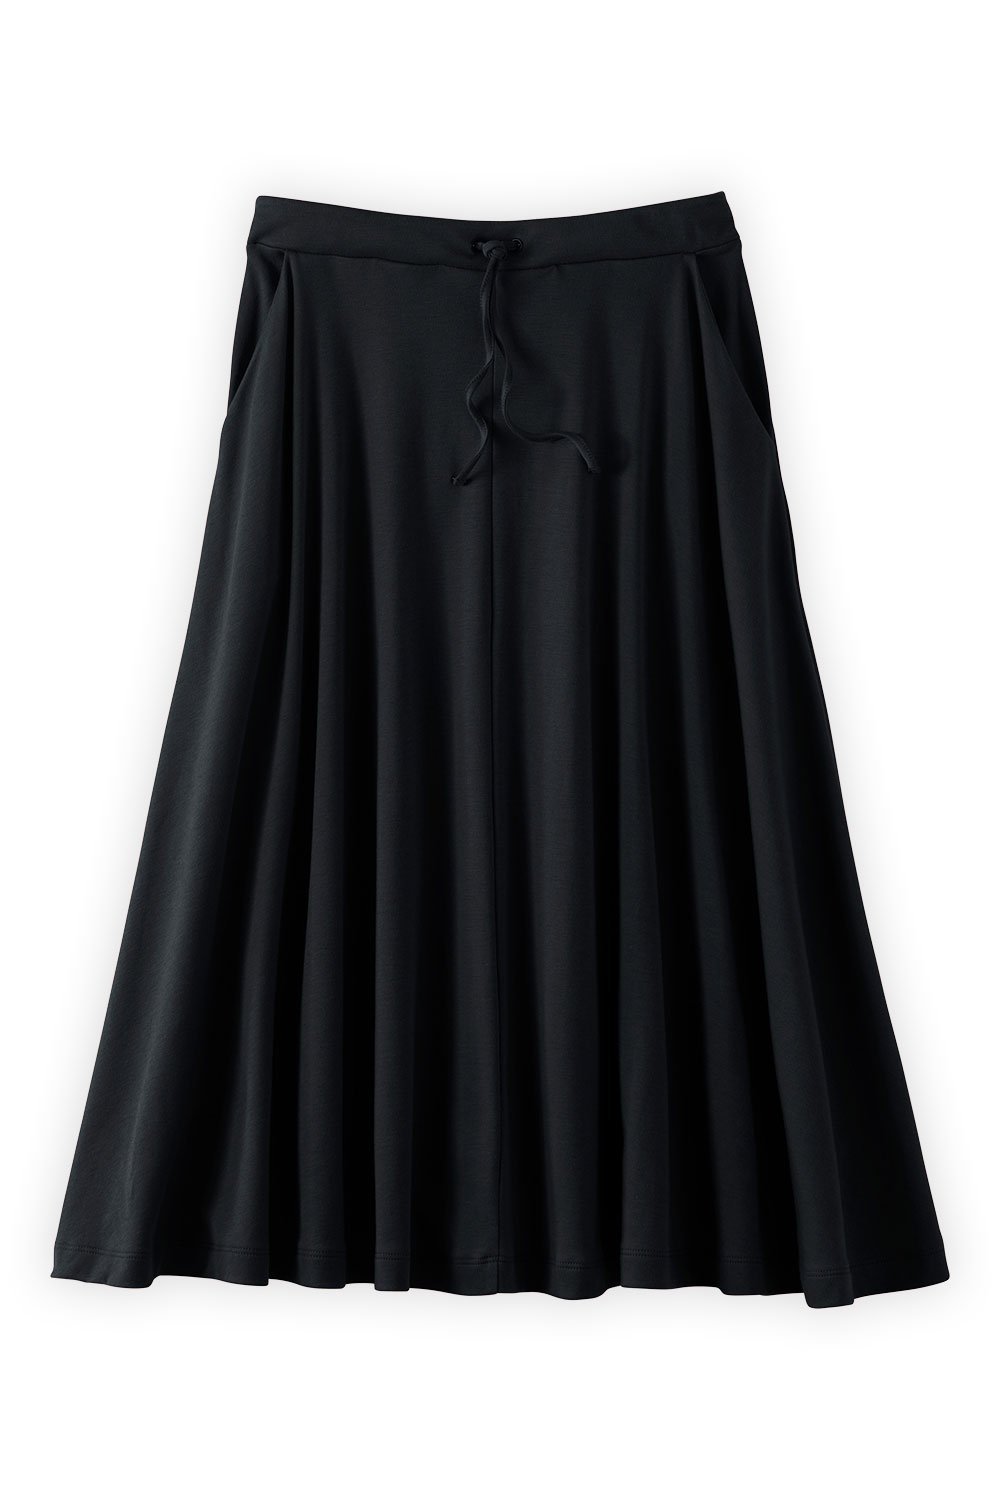 STRETCH IS COMFORT Women's A-Line Skirt with Pockets Black Small